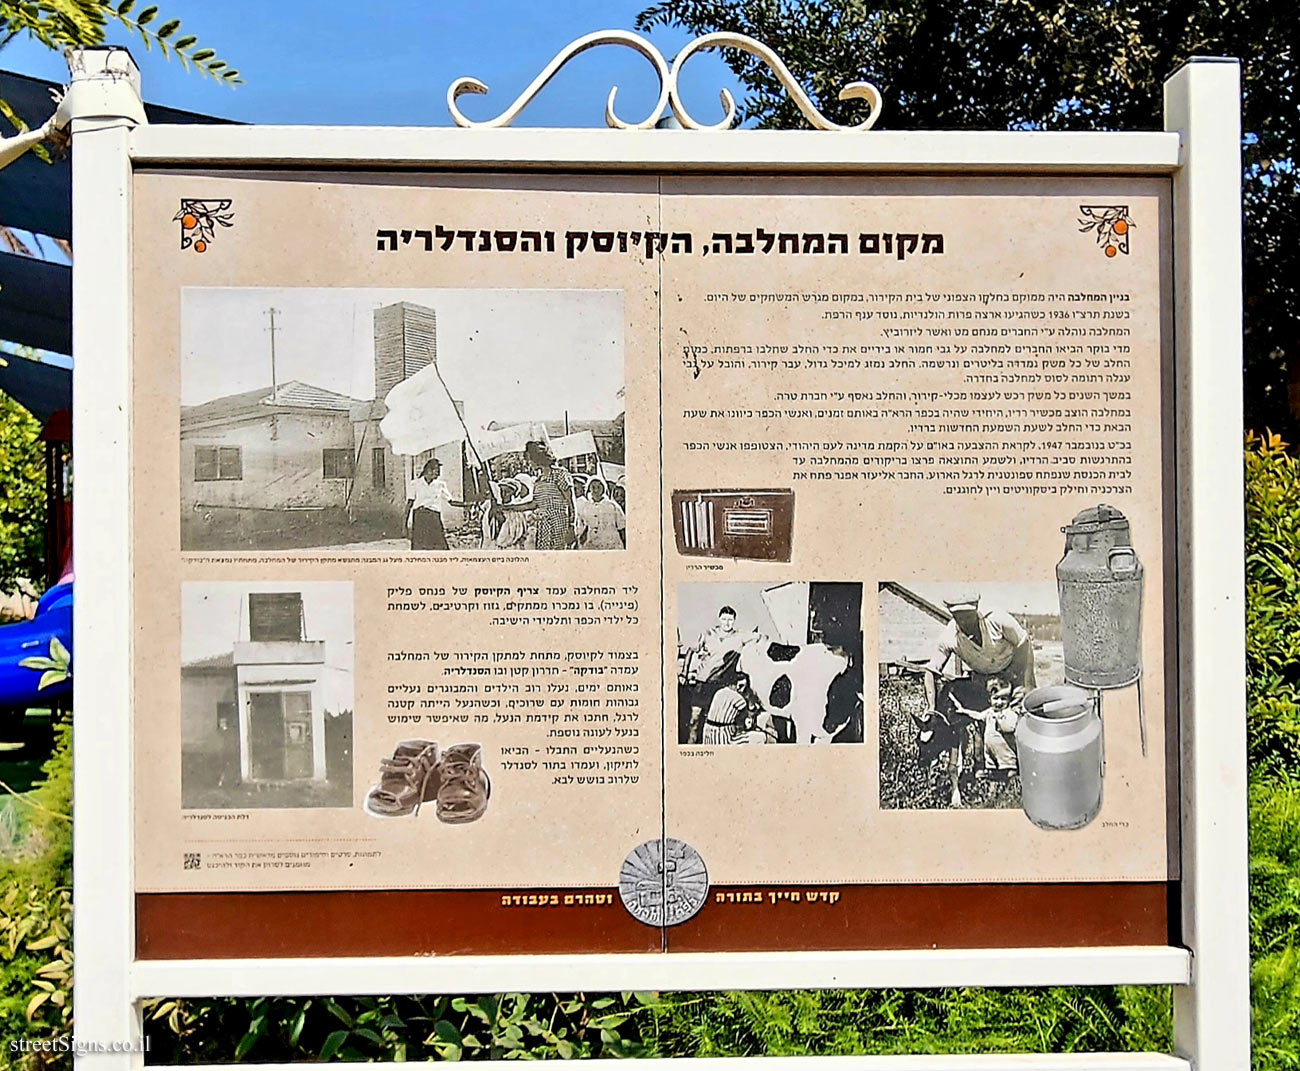 Kfar Haroeh - The place of the dairy, the kiosk and the shoe store